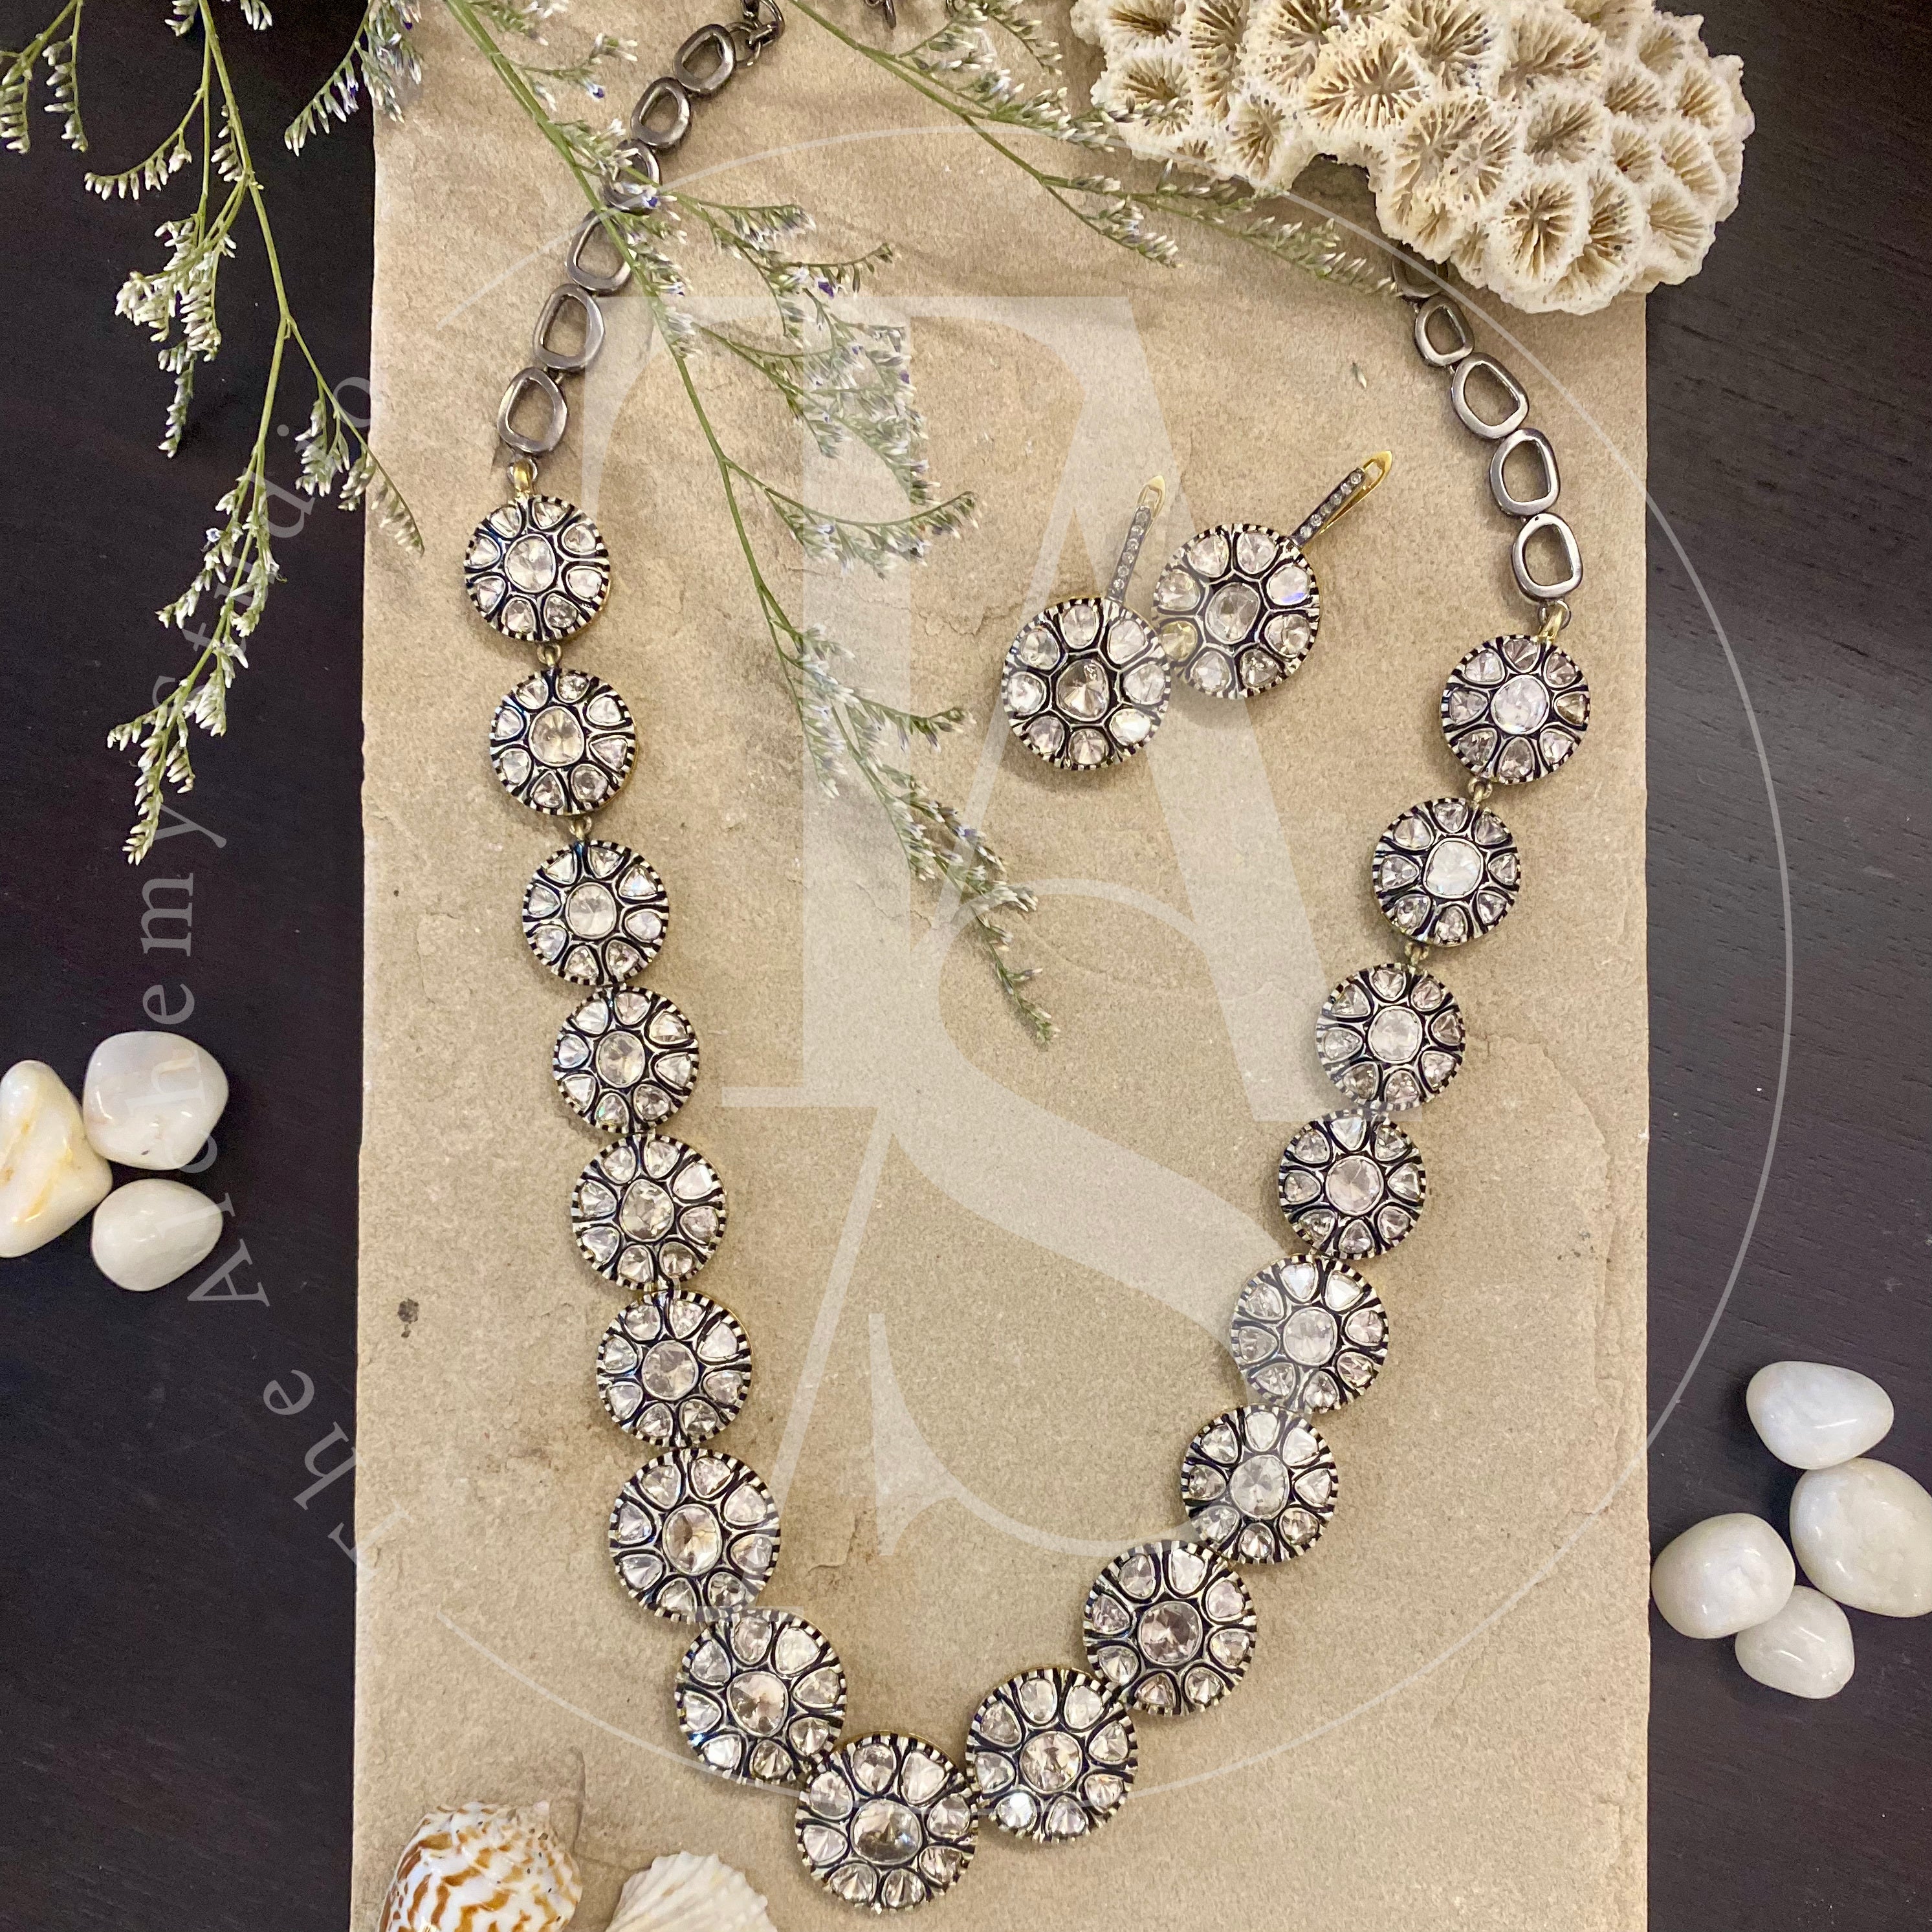 Indian Jewellery and Clothing: Uncut diamond diamond necklace with pearl  drops from P.… | Diamond jewelry necklace, Uncut diamond necklace, Indian diamond  jewellery